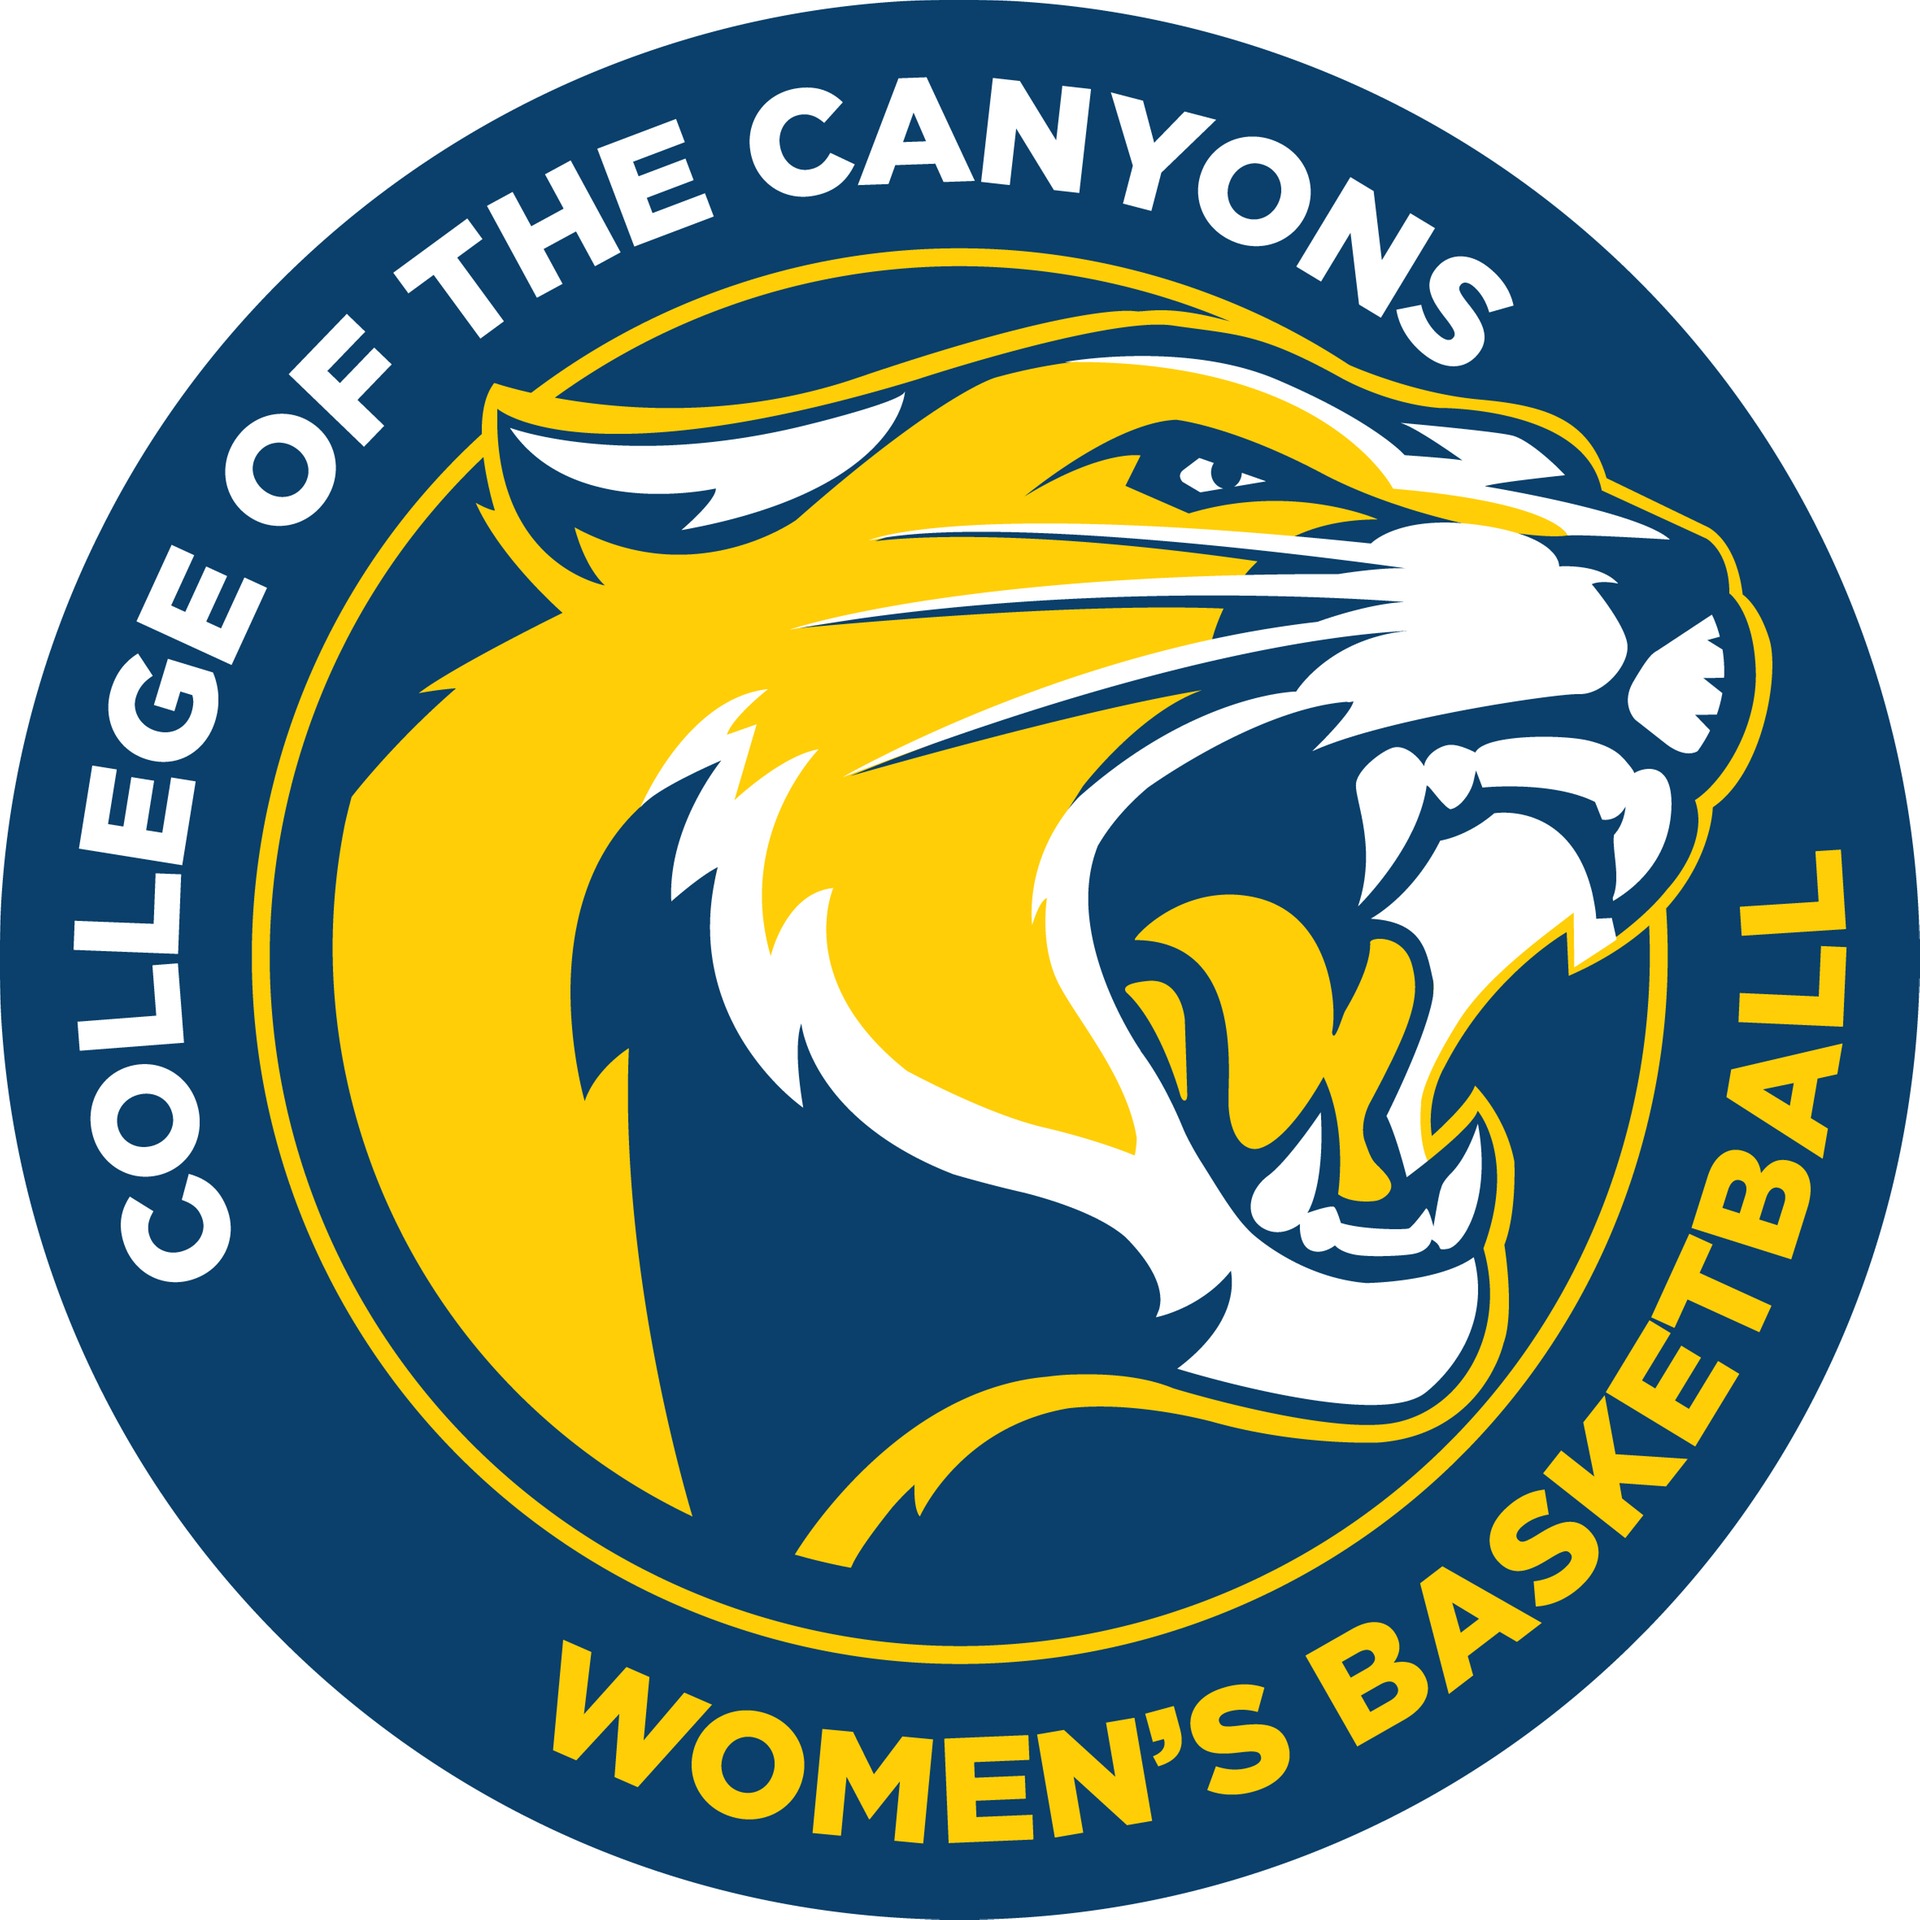 College of the Canyons women's basketball logo.